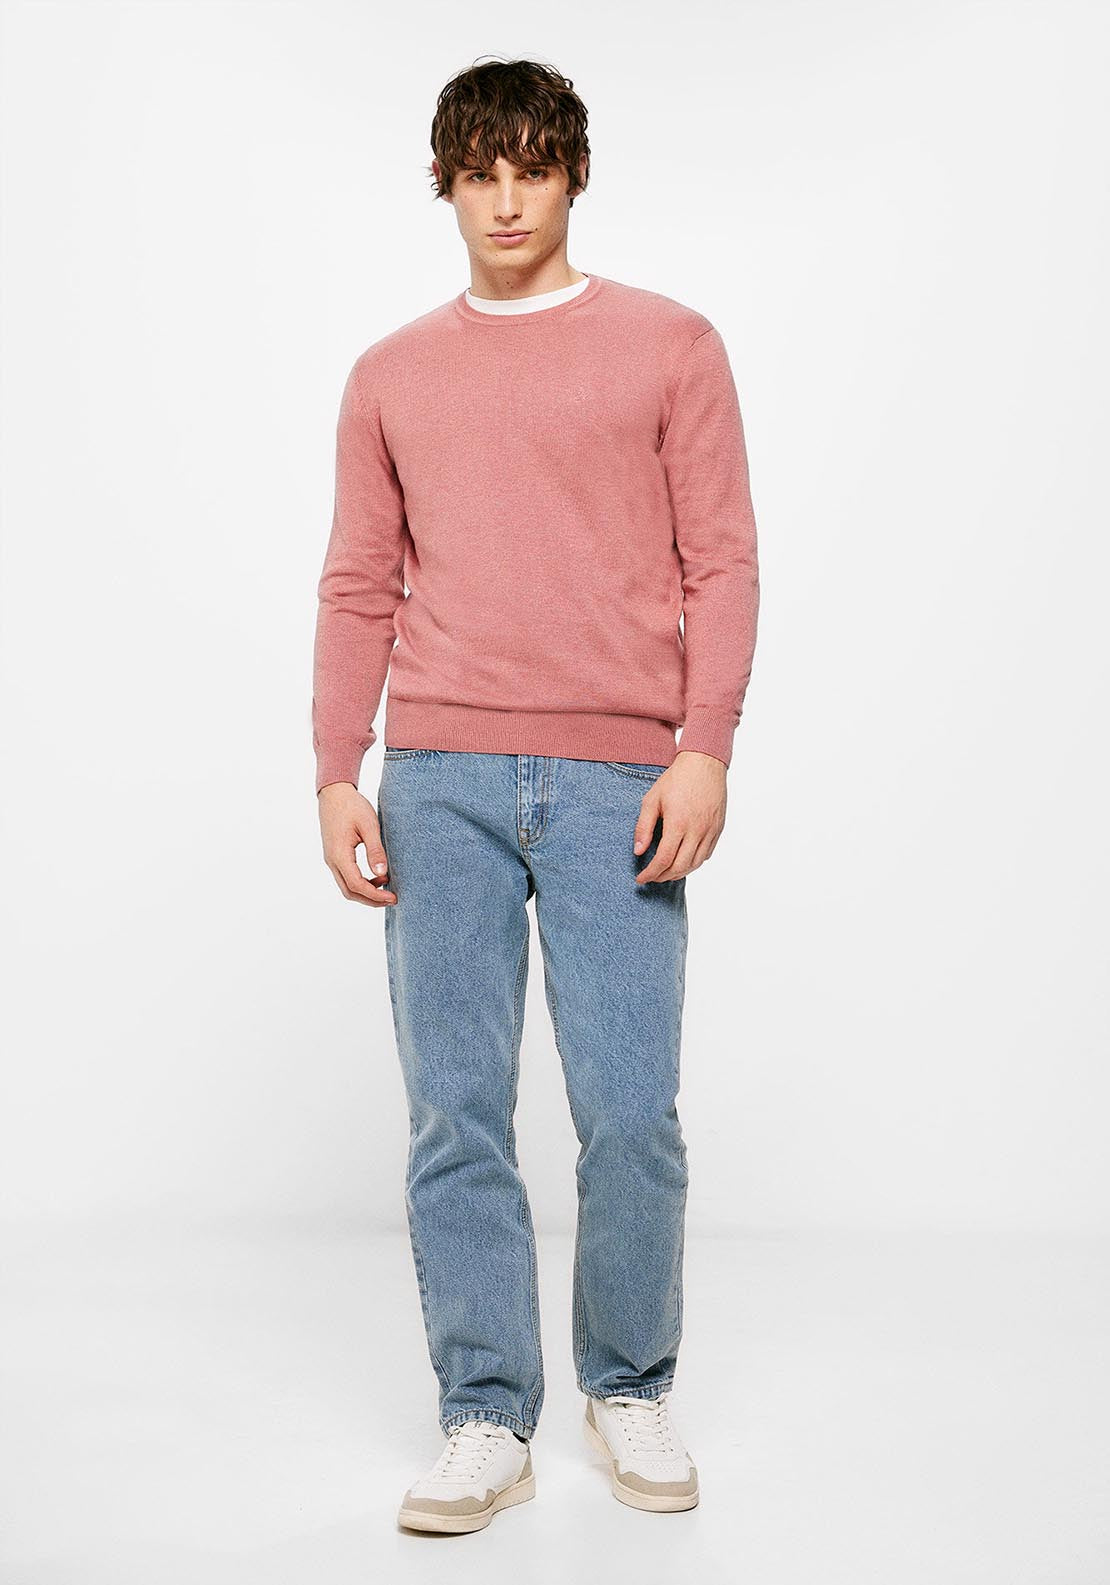 Springfield Essential jumper with elbow patches - Pink 1 Shaws Department Stores